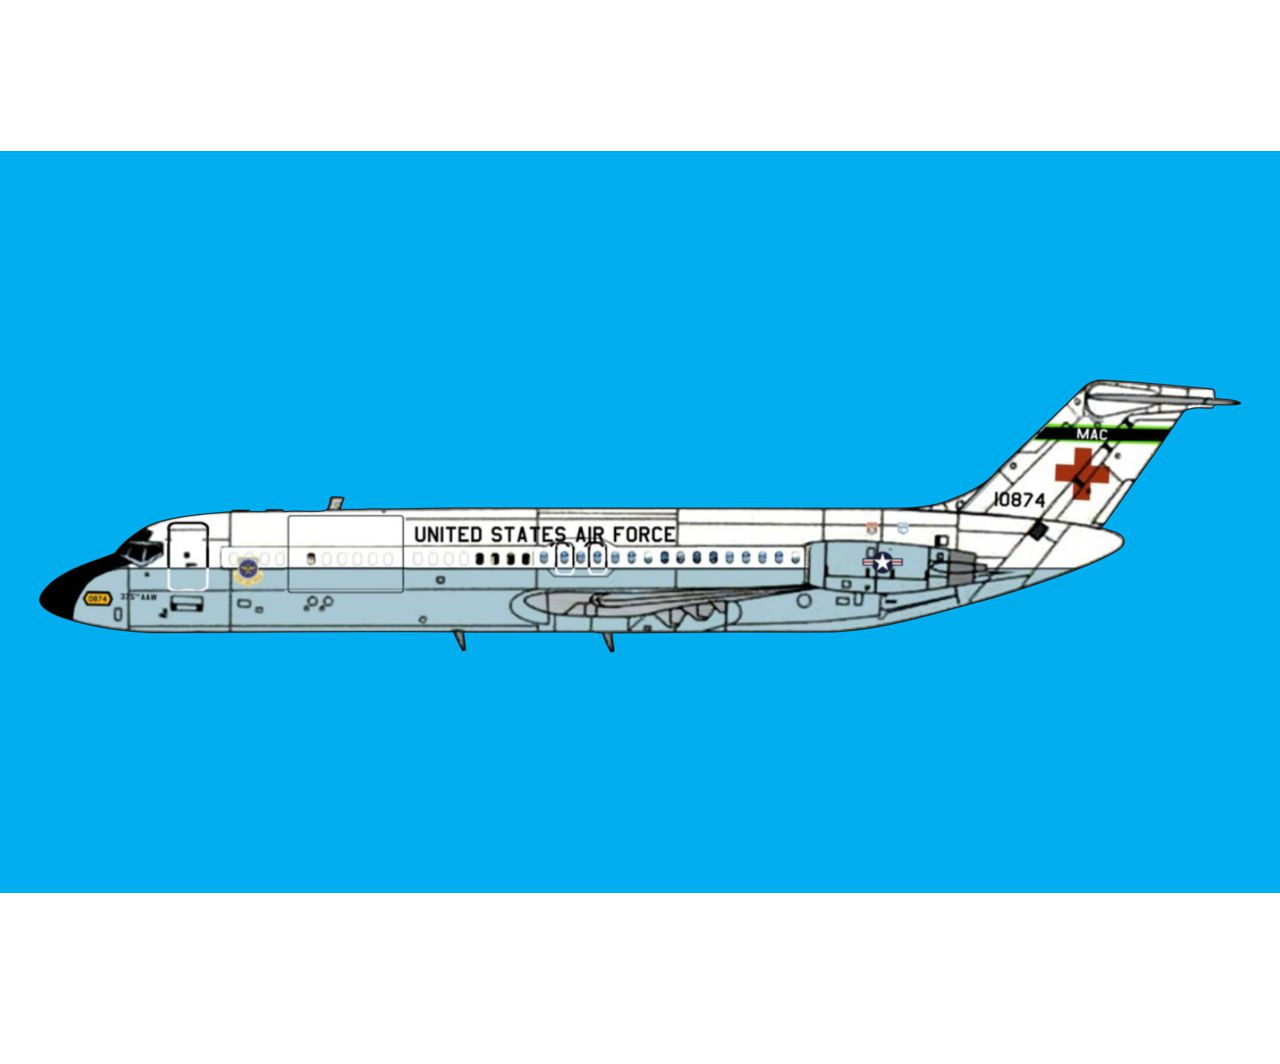 Special/Custom order: USAF Plane drawing/decal